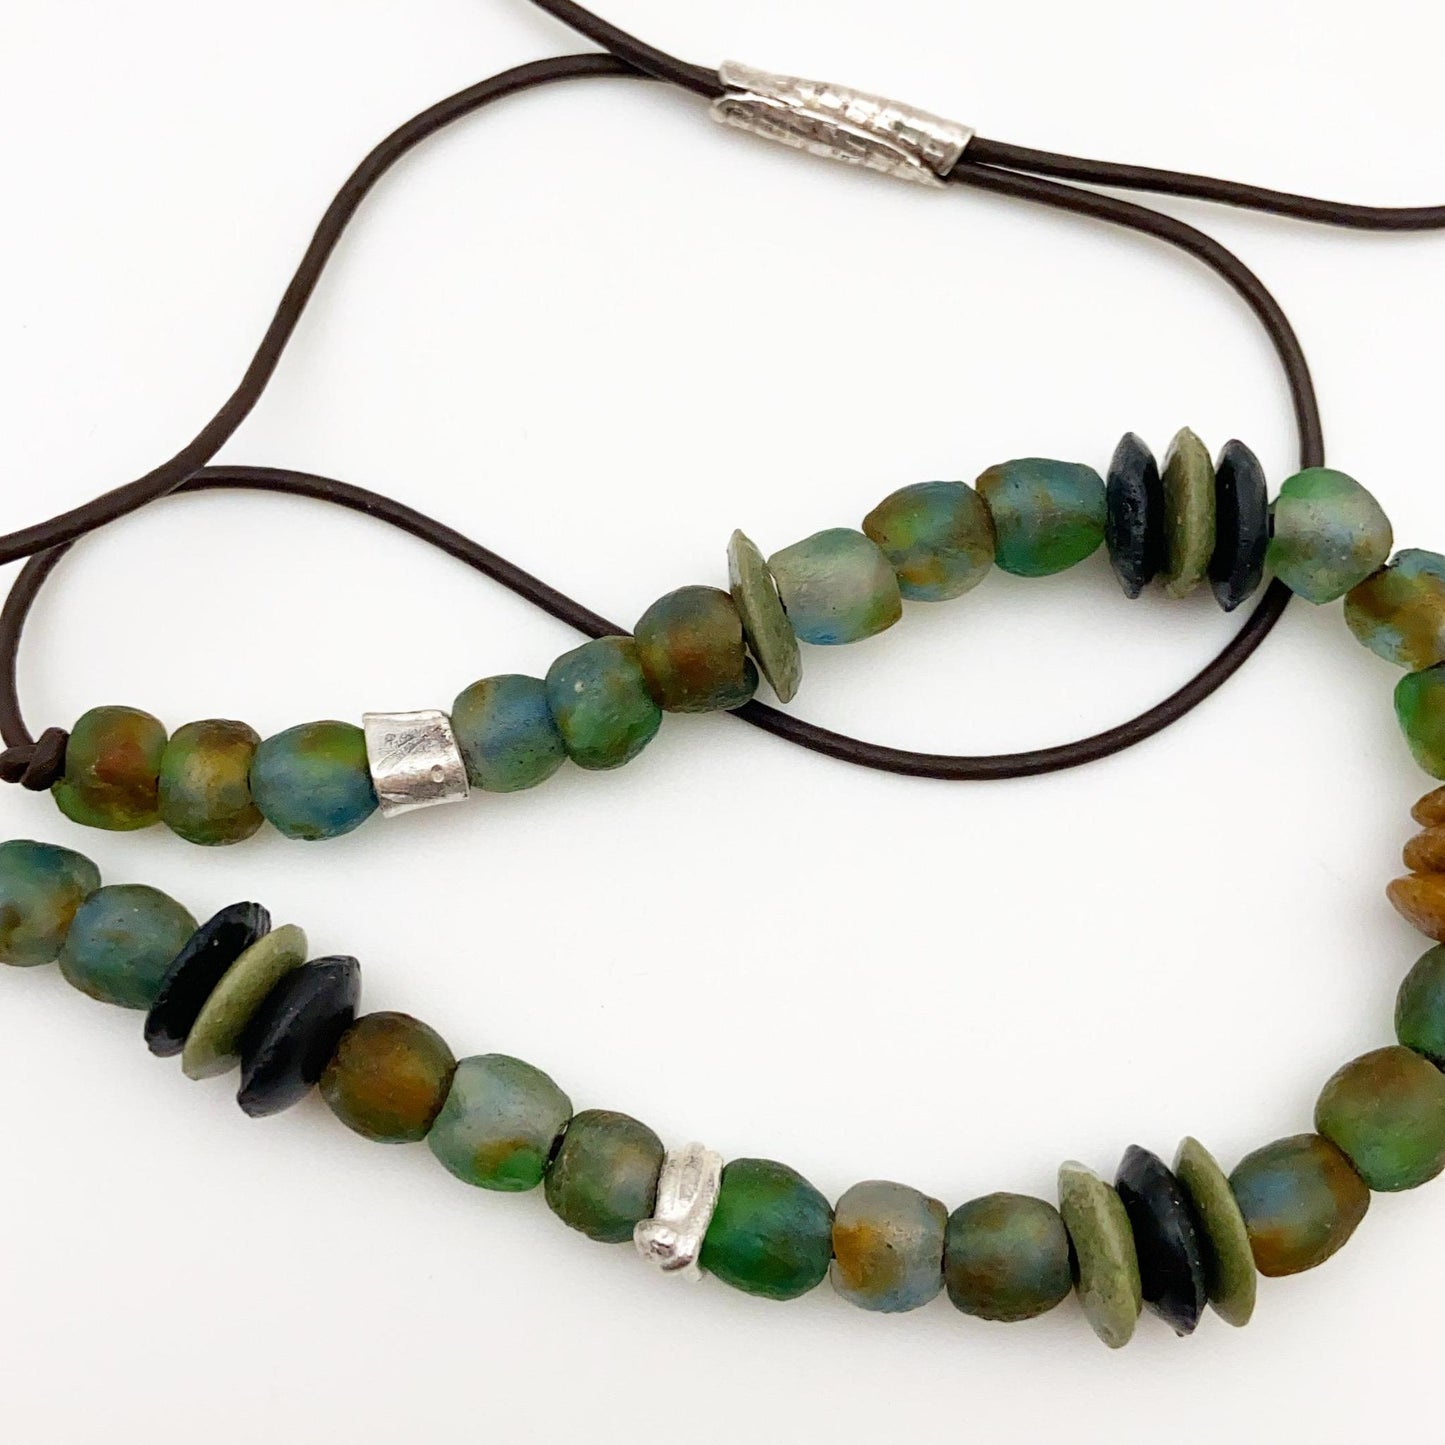 Necklace - Glass Trade Beads on Leather with Sterling